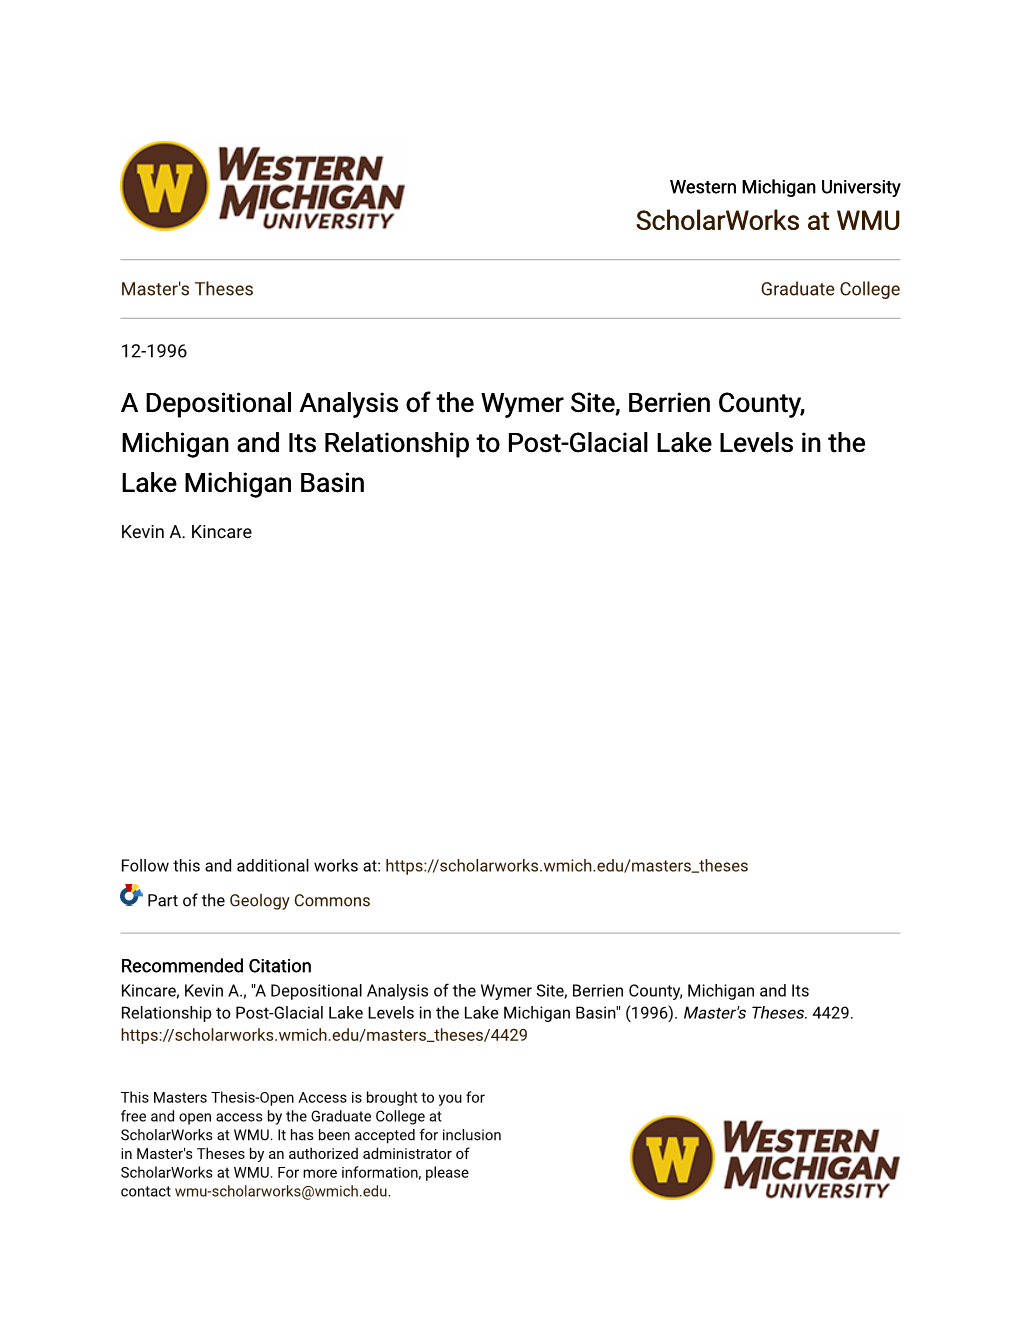 A Depositional Analysis of the Wymer Site, Berrien County, Michigan and Its Relationship to Post-Glacial Lake Levels in the Lake Michigan Basin